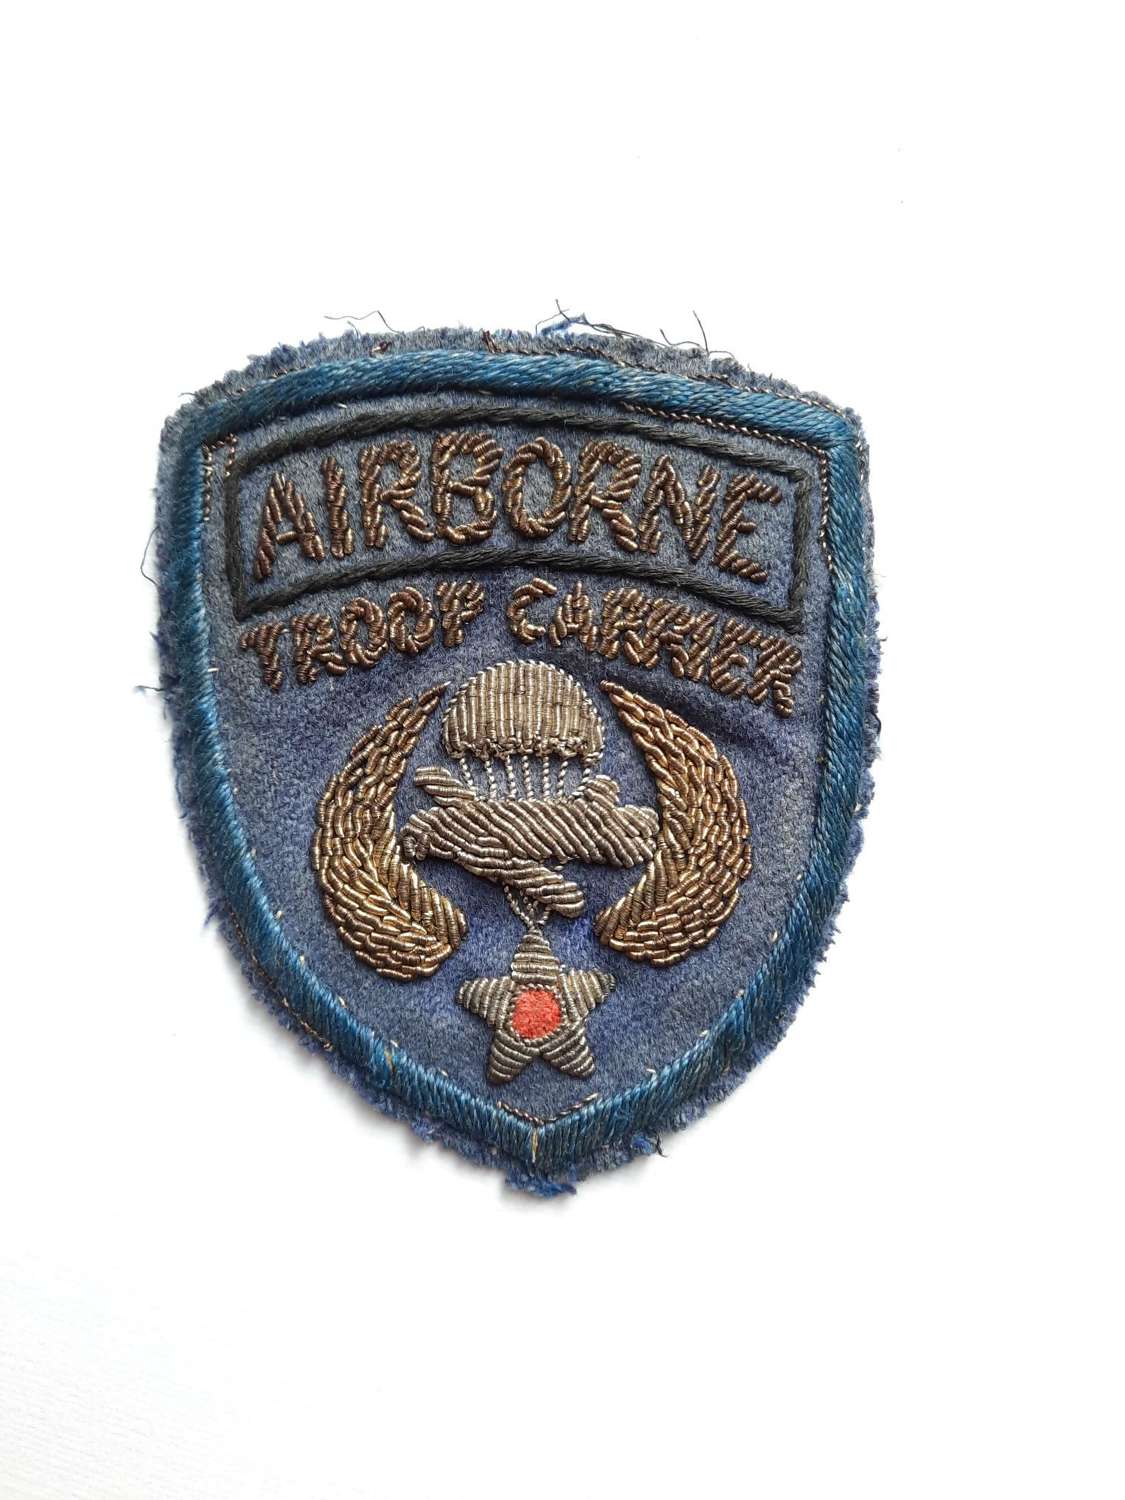 WW2 US Troop Carrier Command Italian-Made Patch